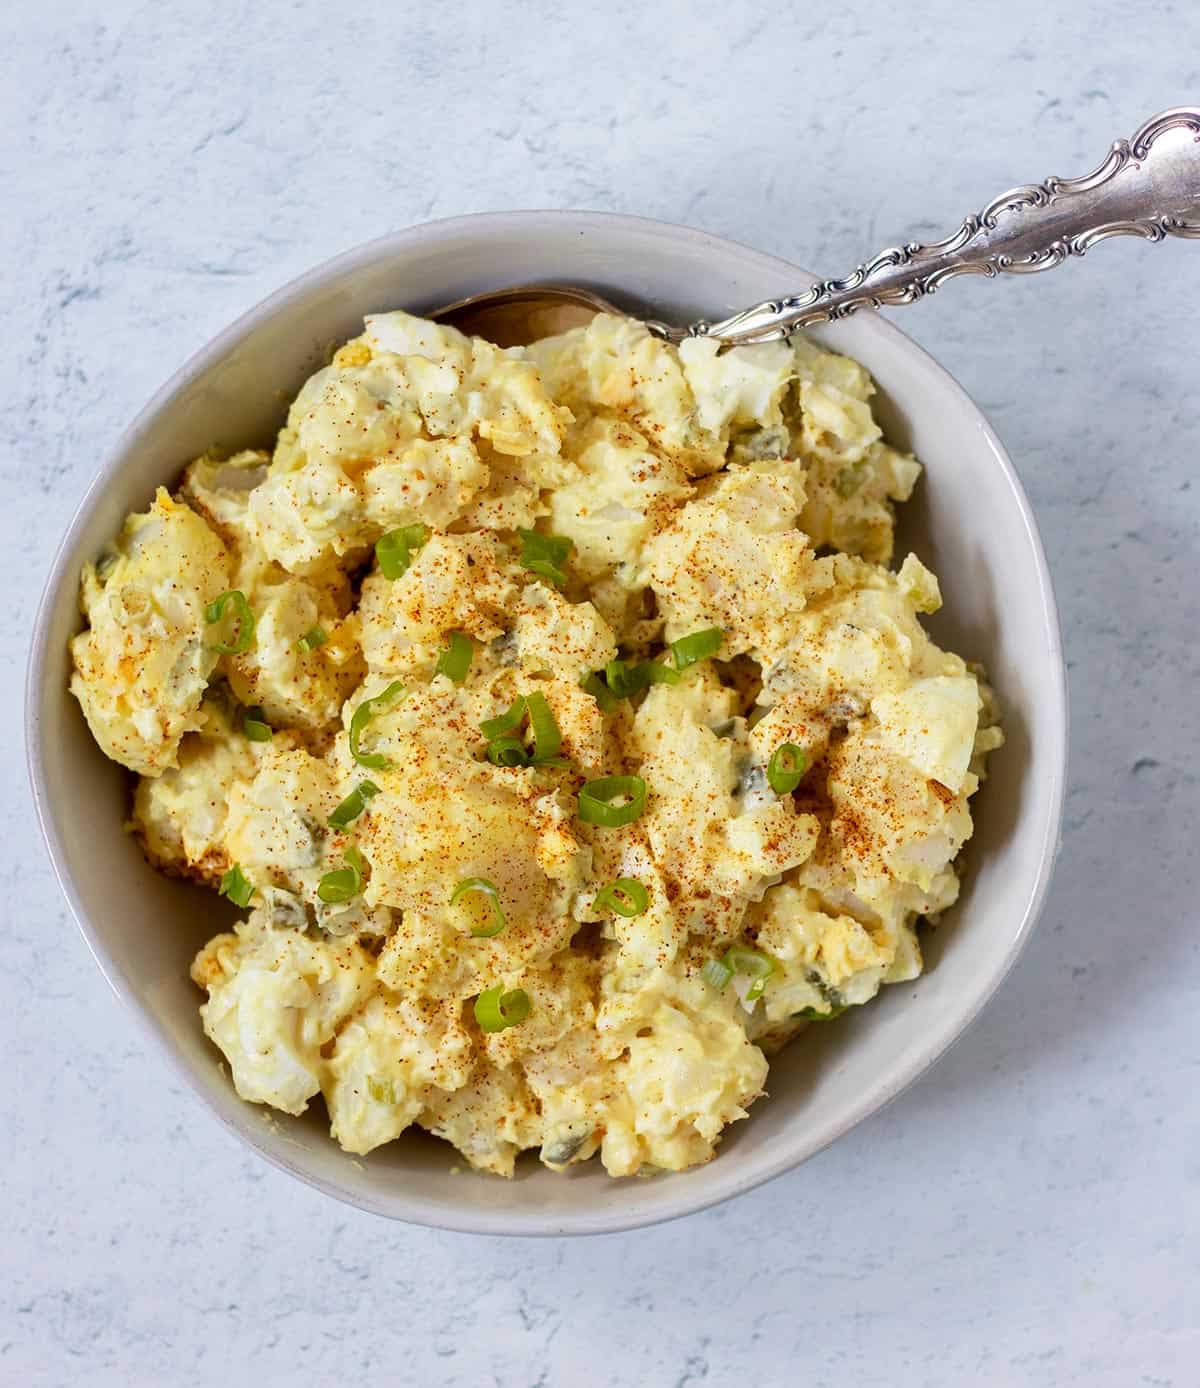 mustard potato salad in a white bowl with a silver spoon that's garnished with paprika and chopped green onions.